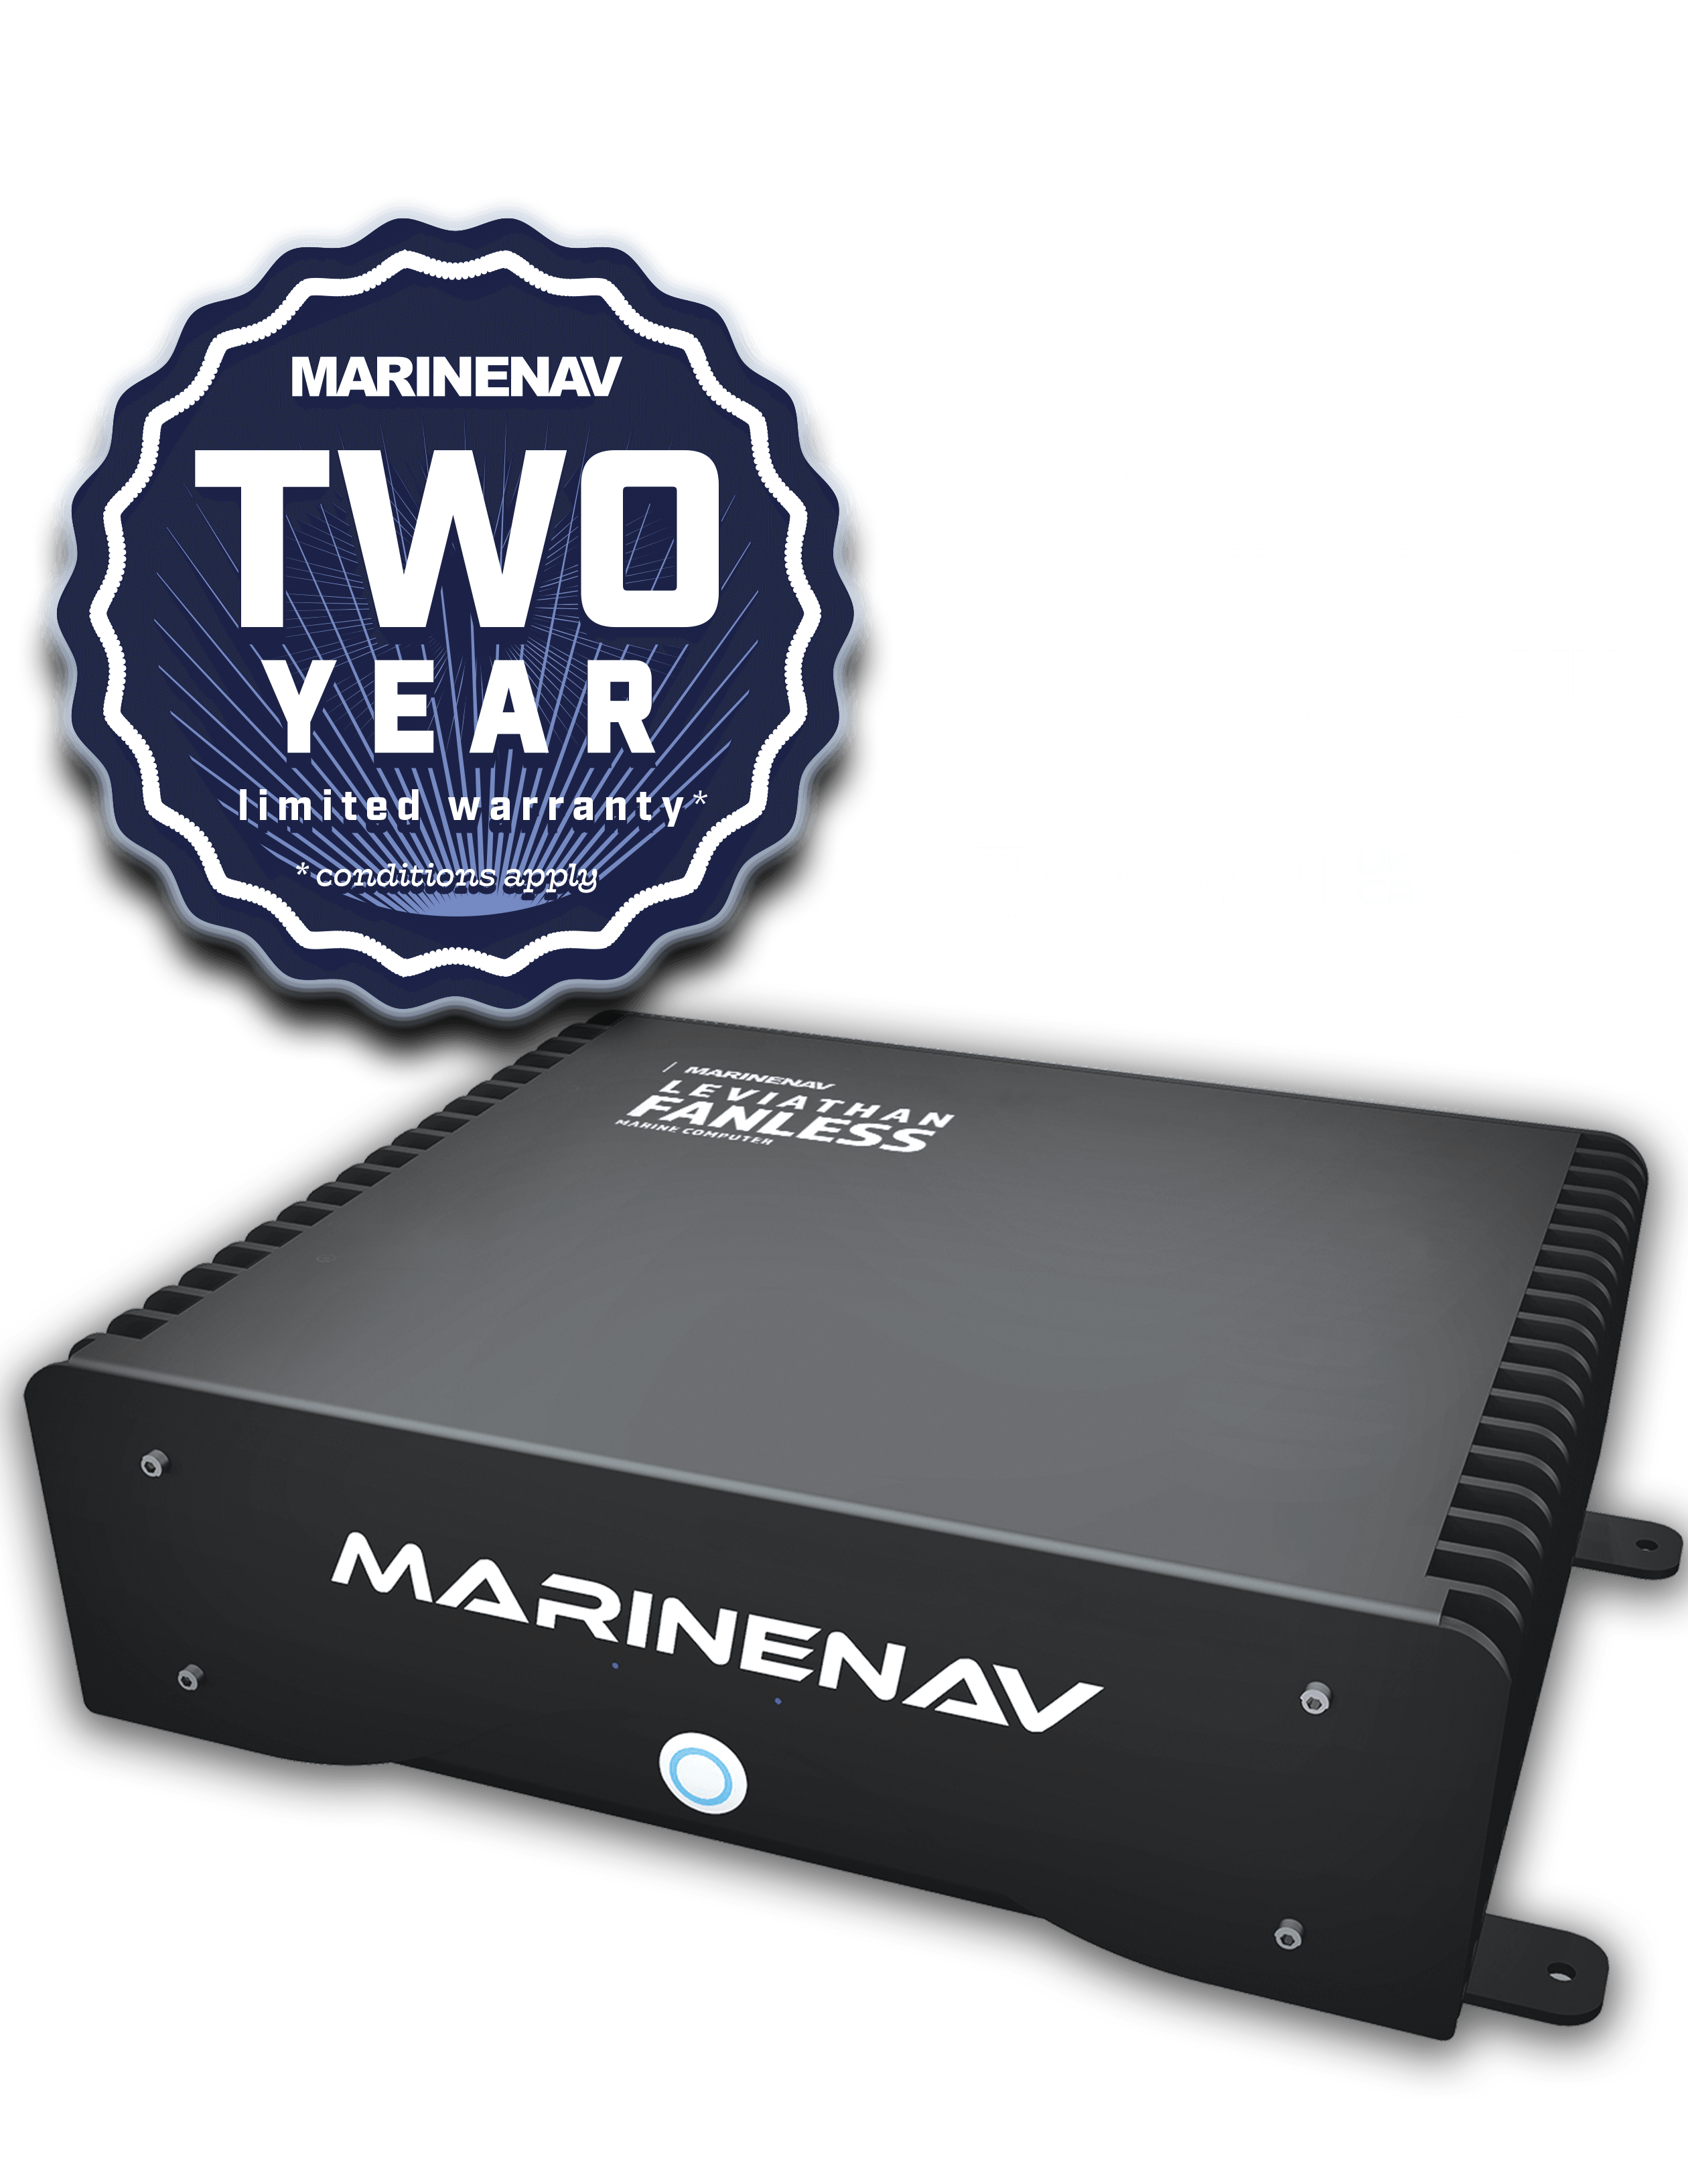 The most reliable marine computer on the market. Leviathan marine computers are covered by an 2-year limited warranty